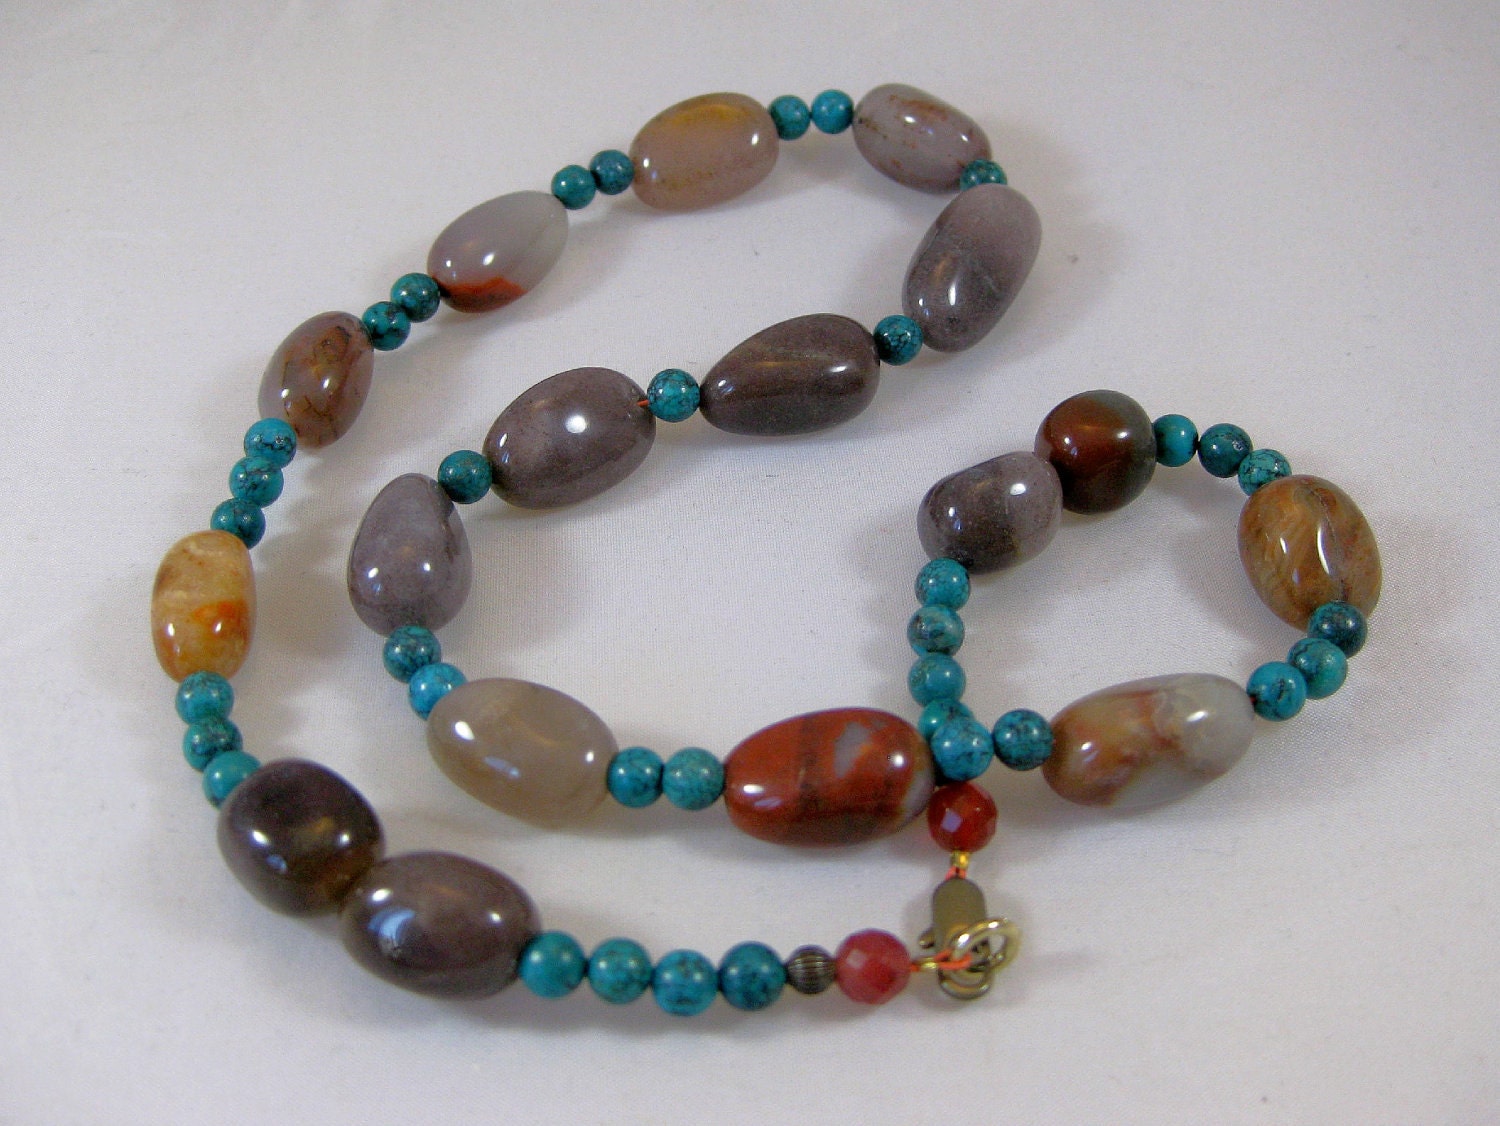 Agate and Turquoise Necklace: Charity Donation - Etsy